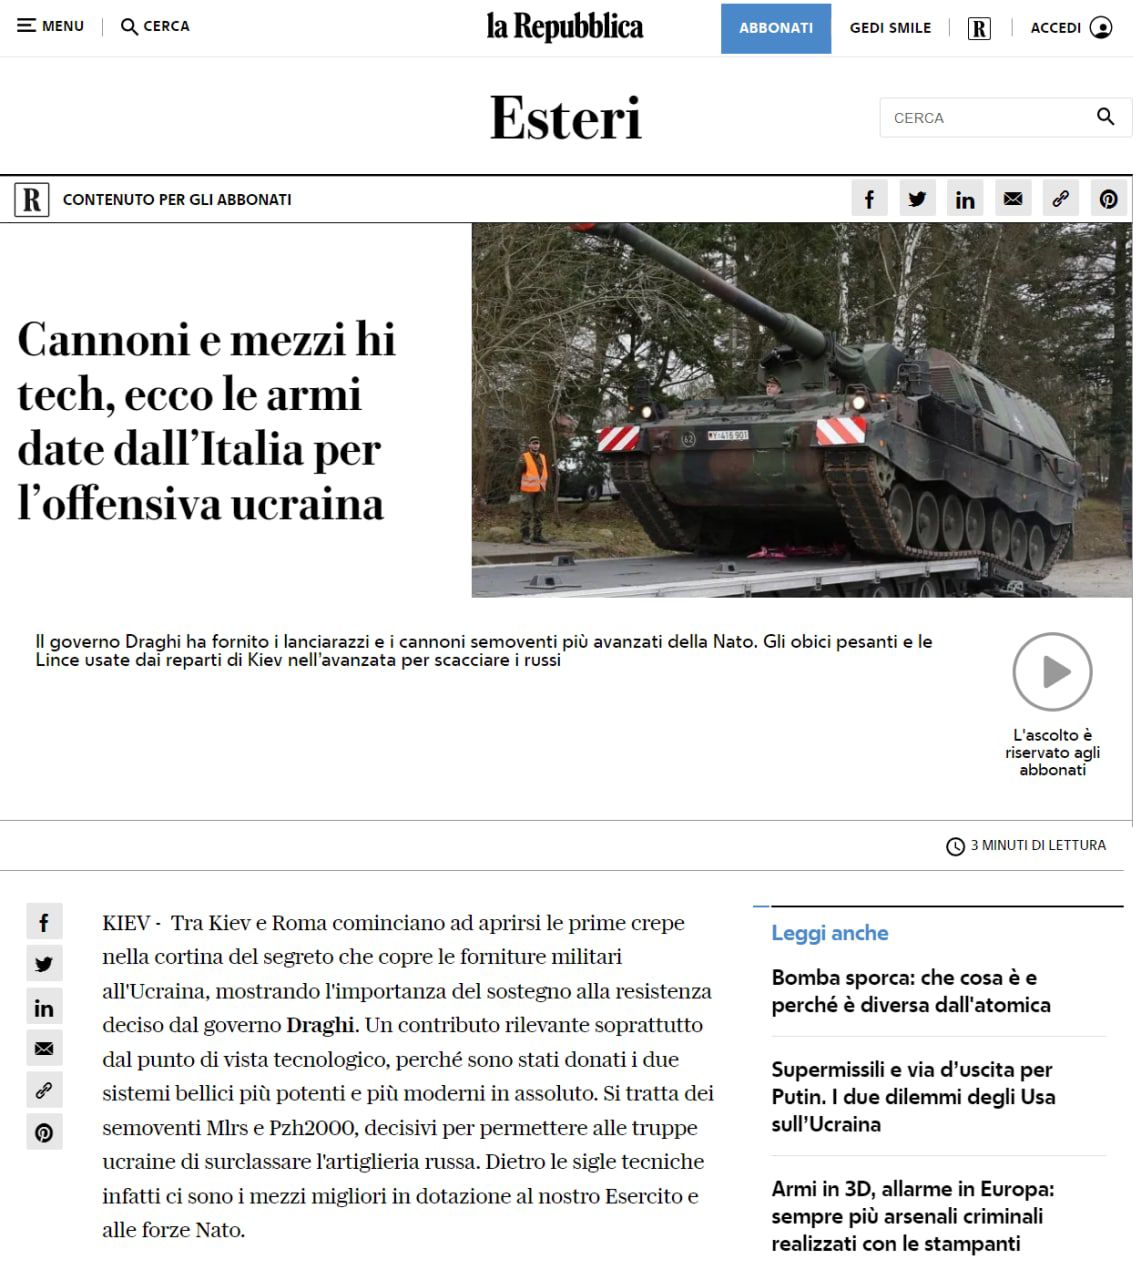 Media: Italy Supplied Much More Weapons to Ukraine than it Claimed